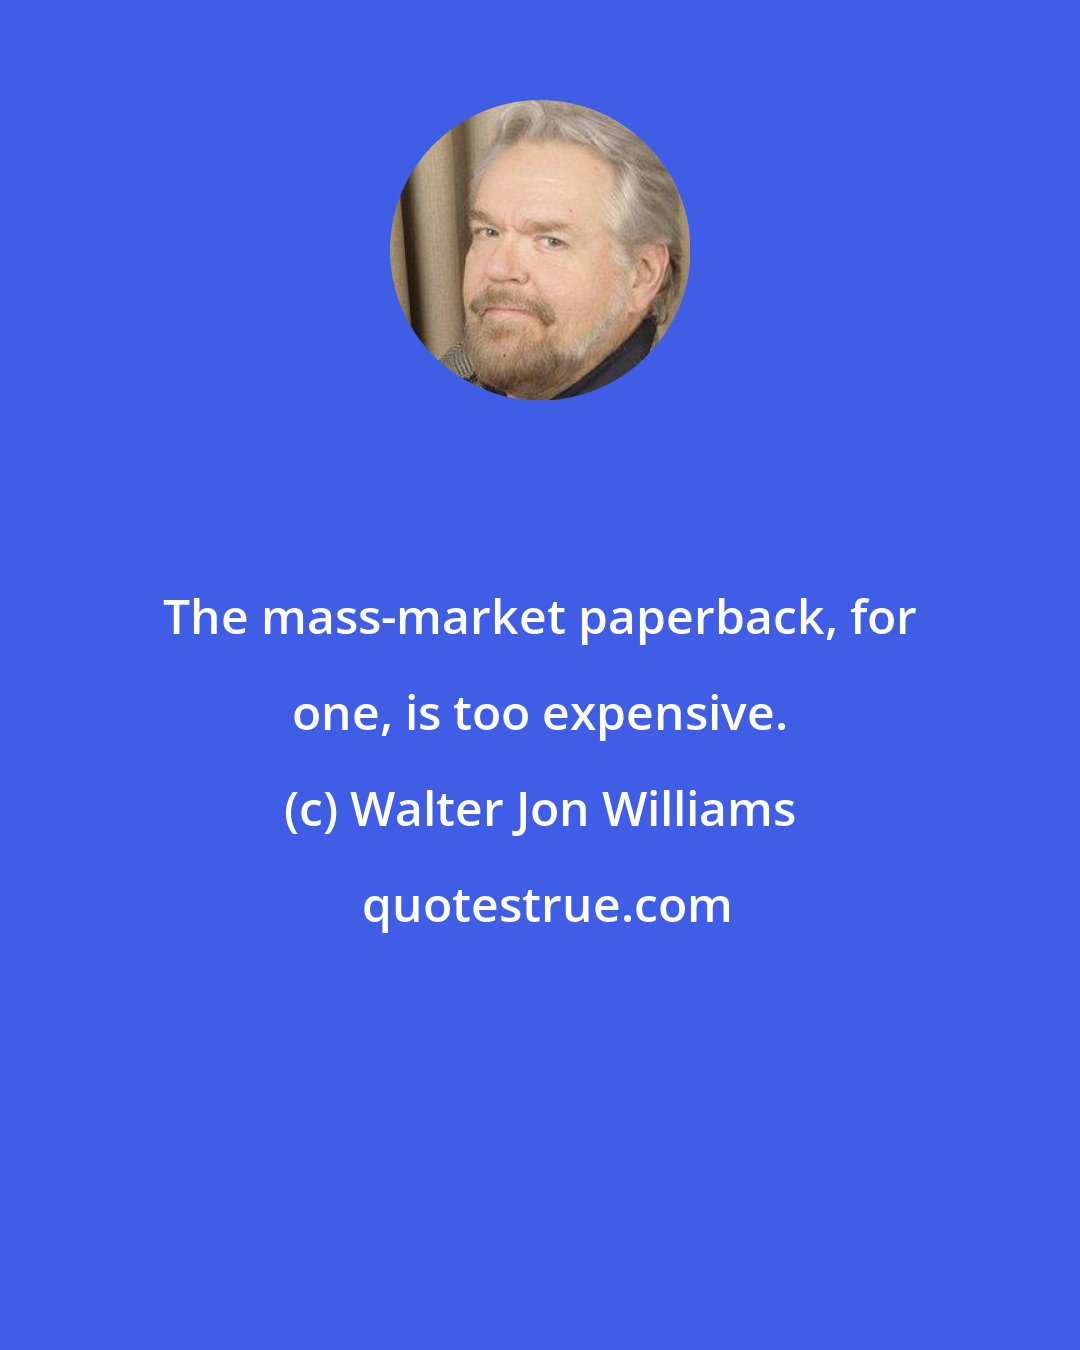 Walter Jon Williams: The mass-market paperback, for one, is too expensive.